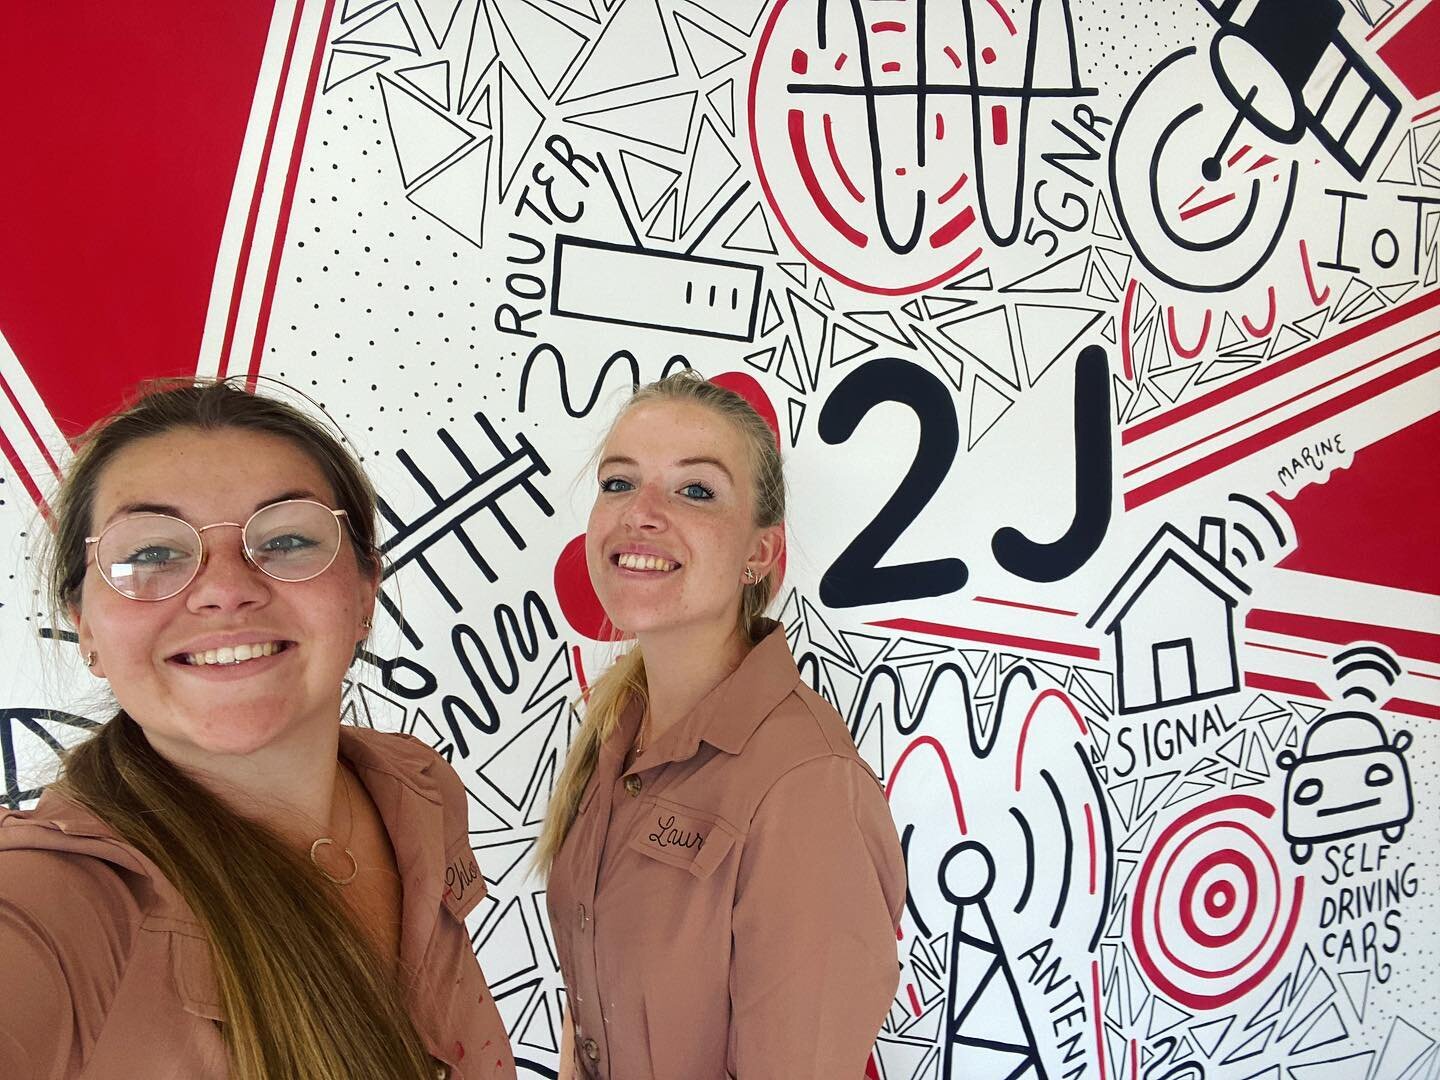 We love our job ❤️ This year has really seen an increase in murals for us, and we&rsquo;re loving it! Thank you to everyone who&rsquo;s supported us, whether it be hiring us for a project or following us on Instagram, it means a lot 🙌